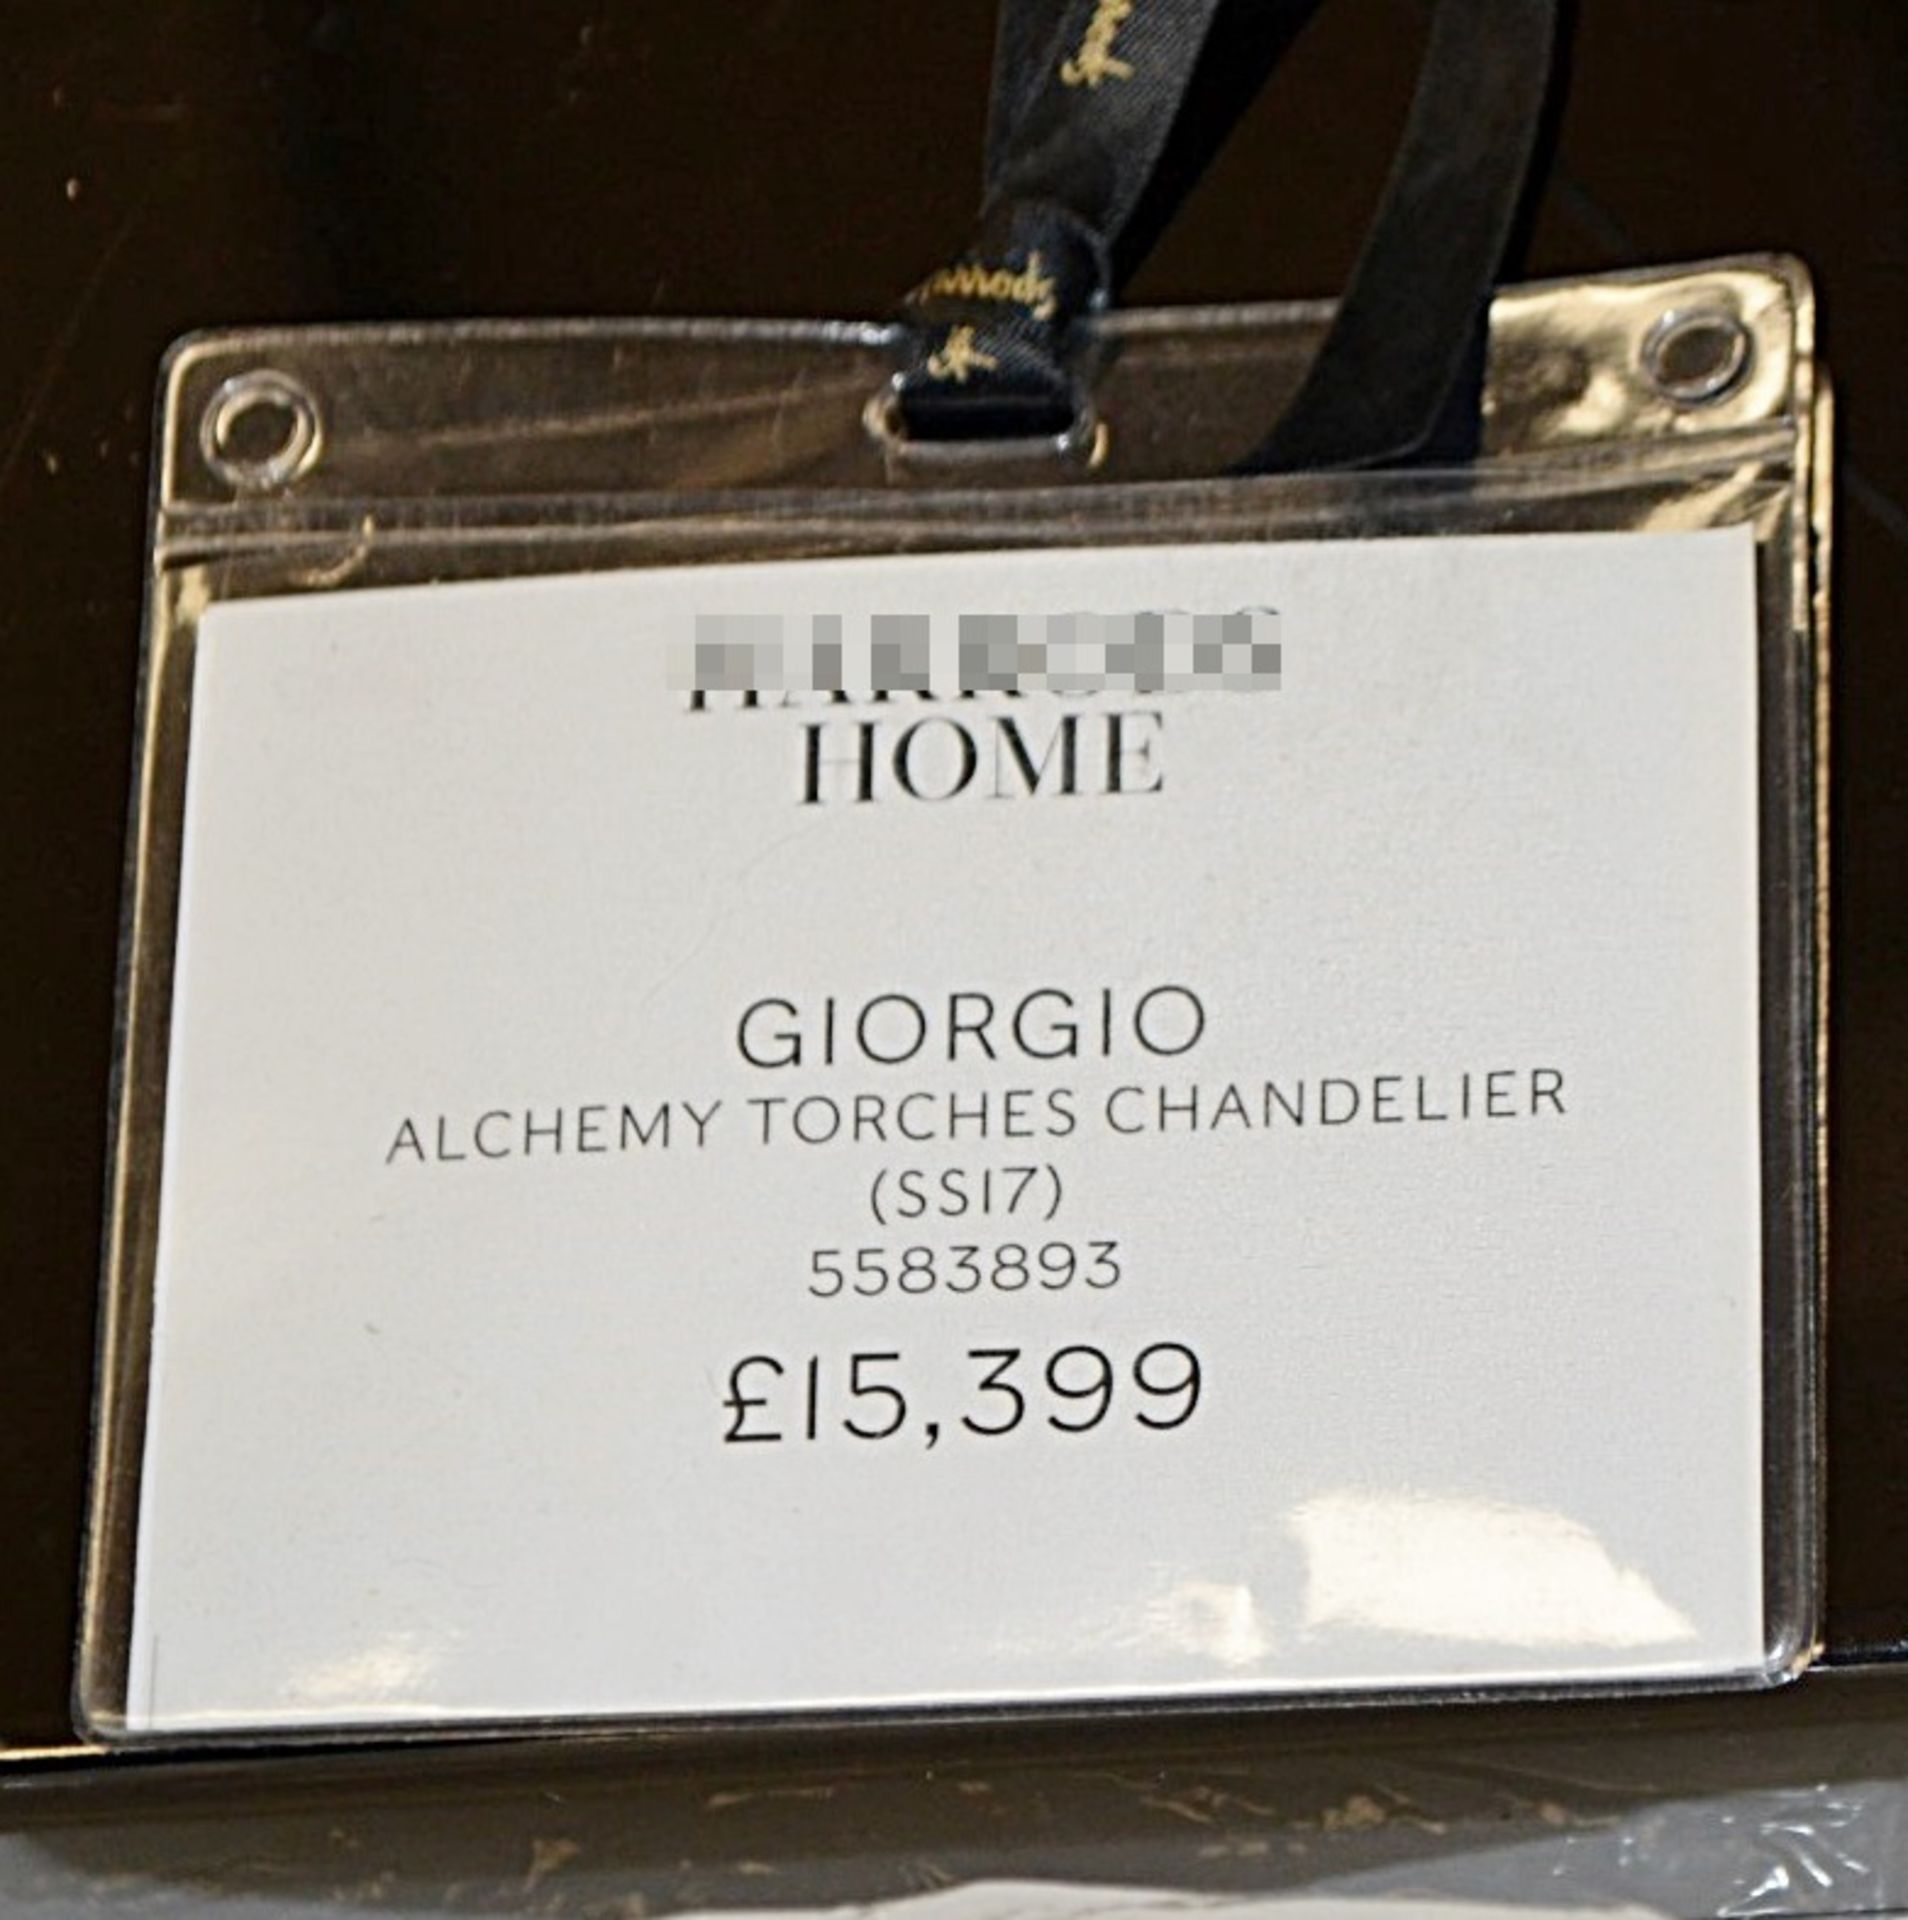 1 x GIORGIO COLLECTION 'Alchemy Torches' 16-Sconce “Murano” Glass Chandelier - Original RRP £15,399 - Image 4 of 11